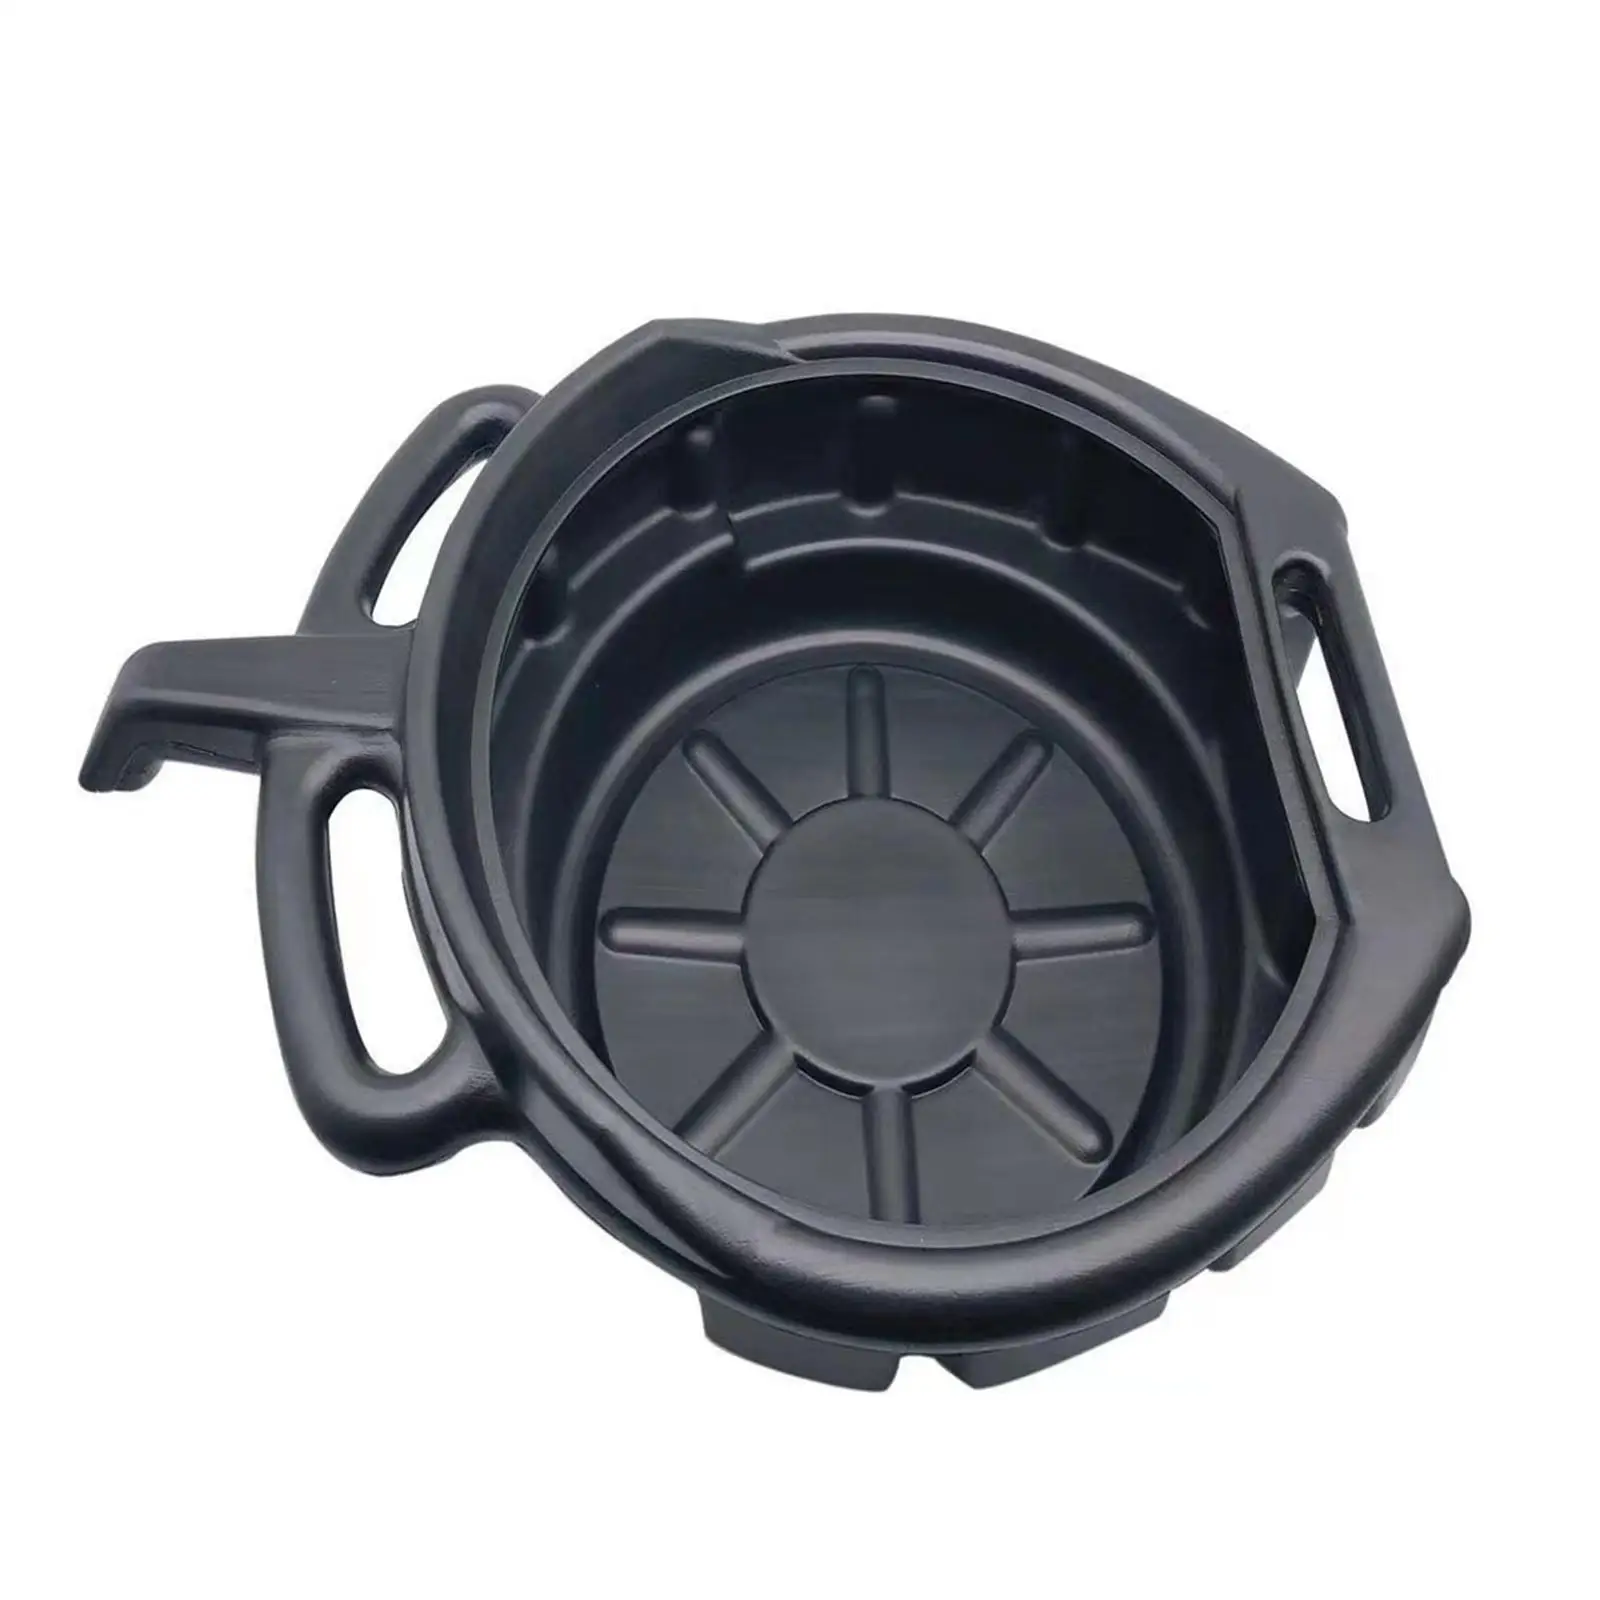 Oil Drain Can Leak Easy to Use PP Durable Garage Tool Fluted Collect Pan for Truck Car Fuel Fluid Garage Tool Garage